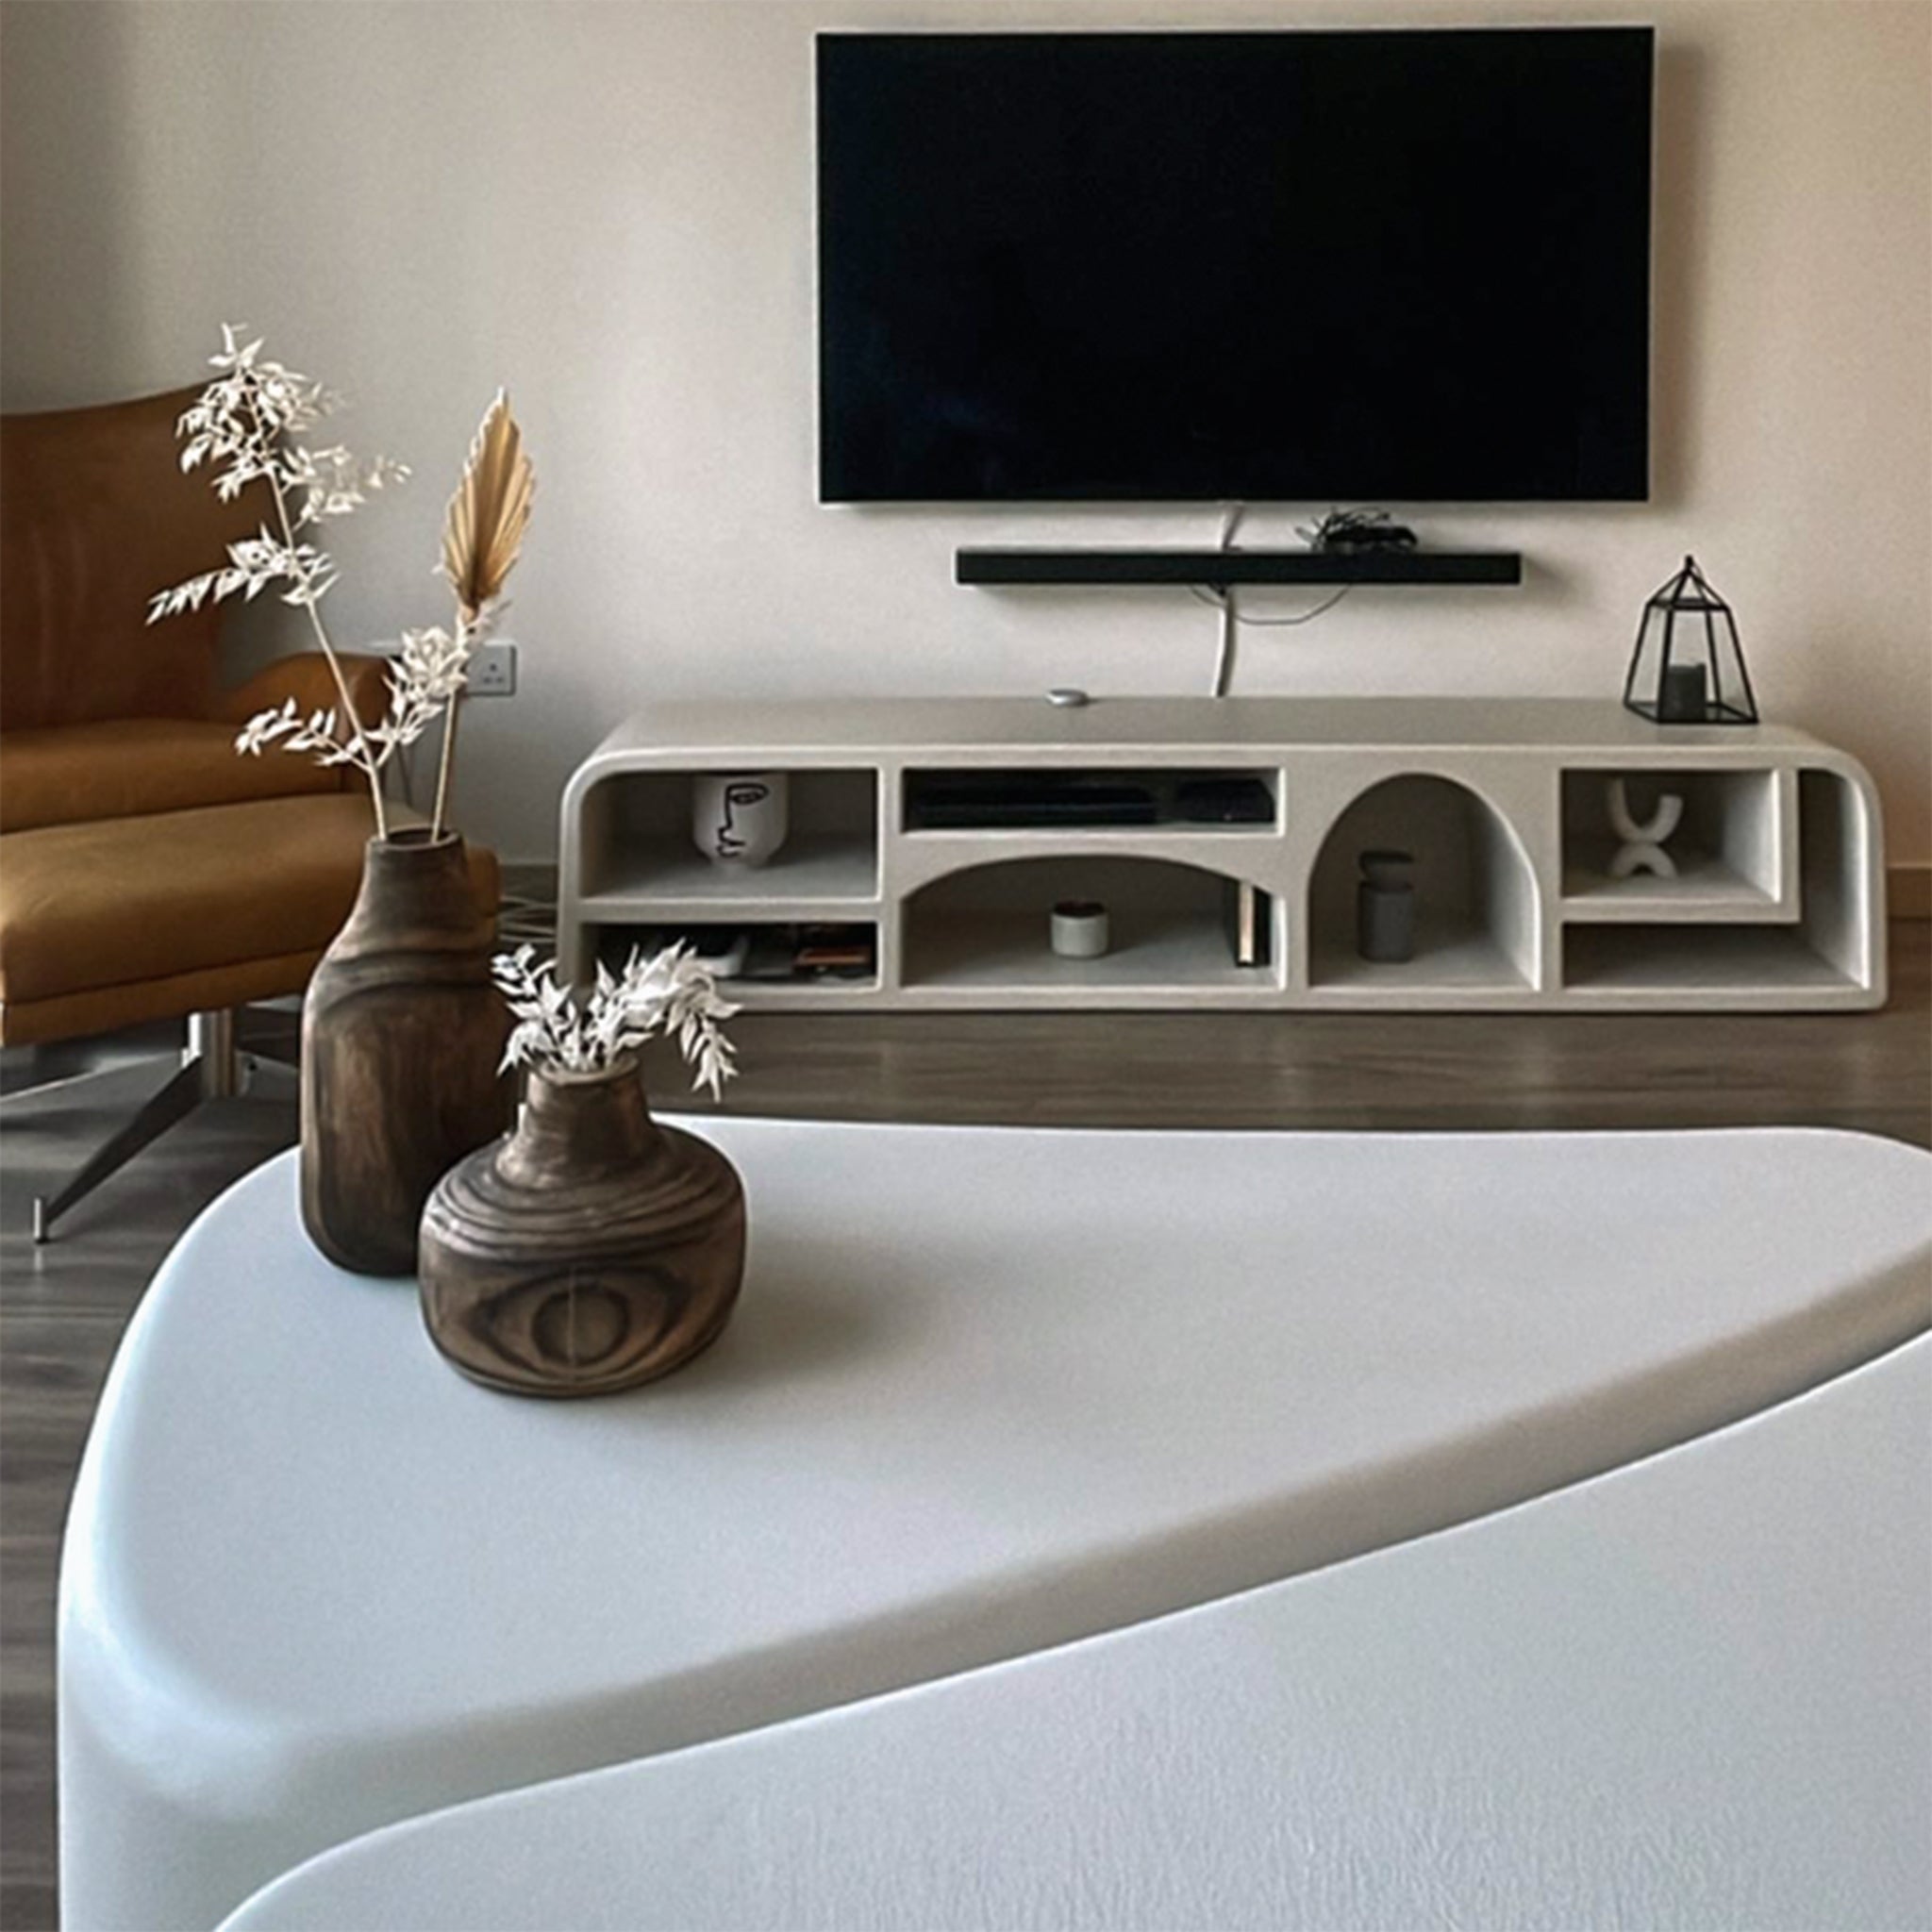 Contemporary TV stand with clean lines and a minimalist aesthetic